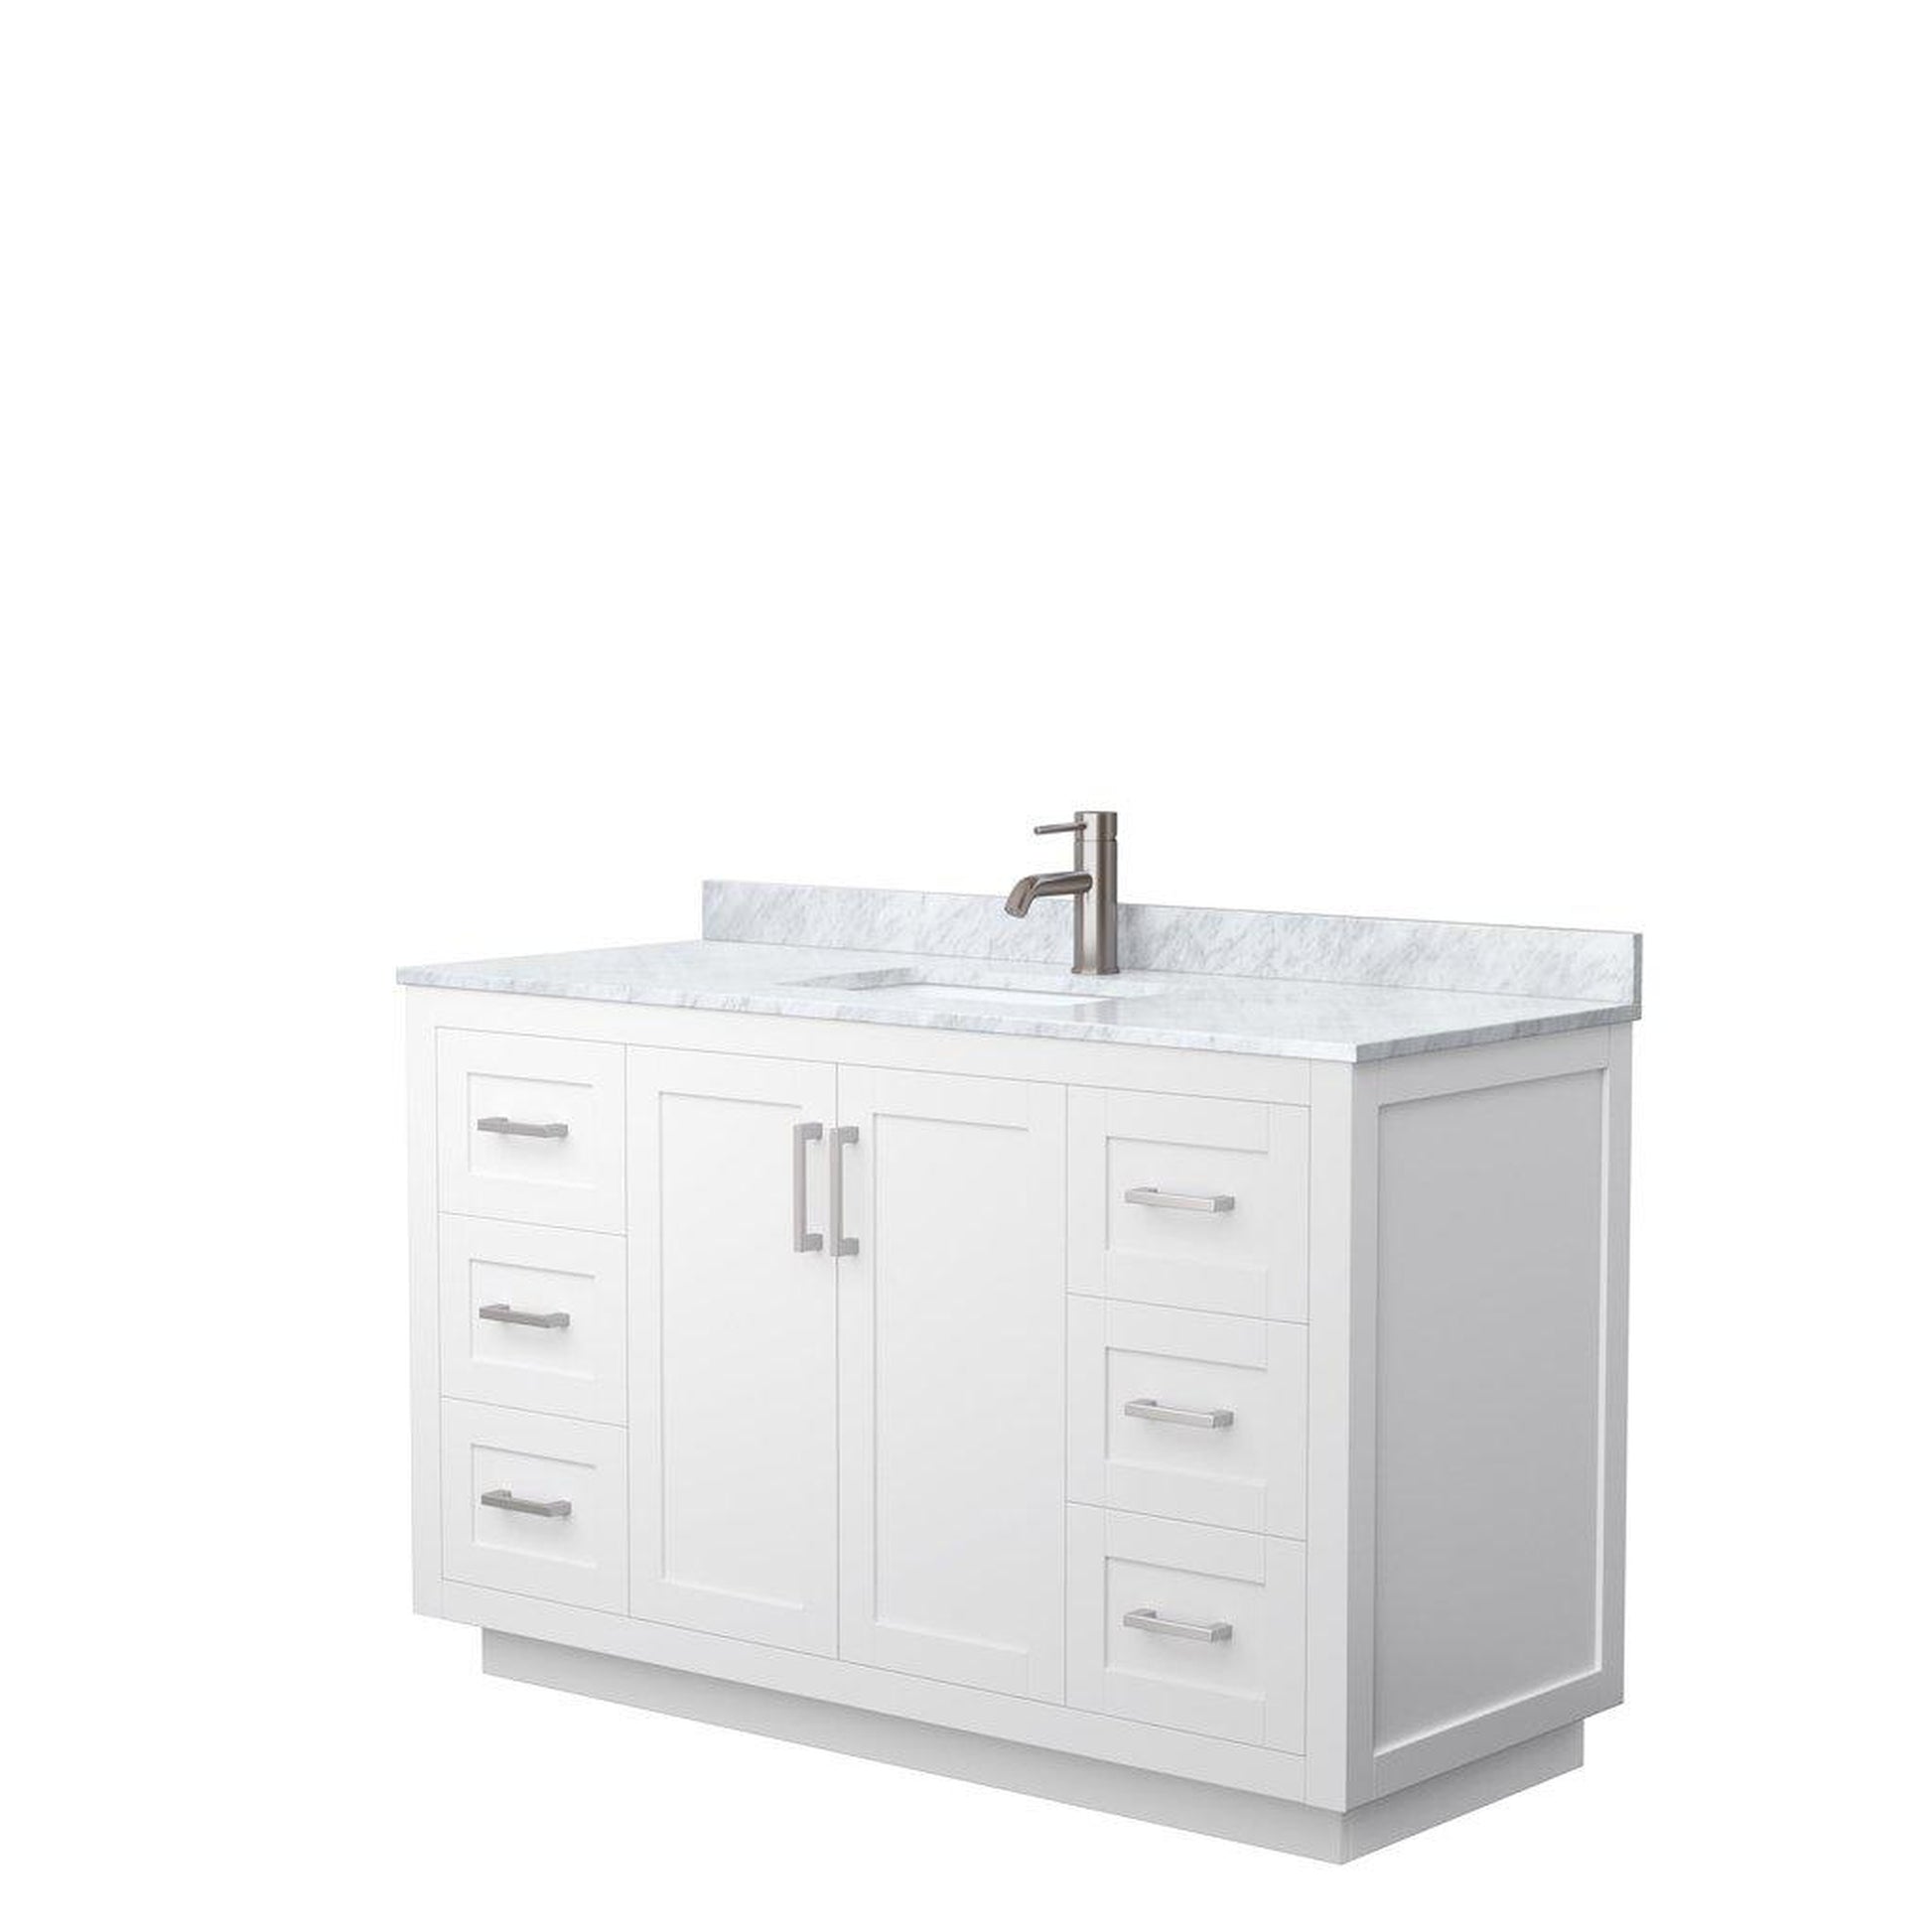 Wyndham Collection Miranda 54" Single Bathroom White Vanity Set With White Carrara Marble Countertop, Undermount Square Sink, And Brushed Nickel Trim